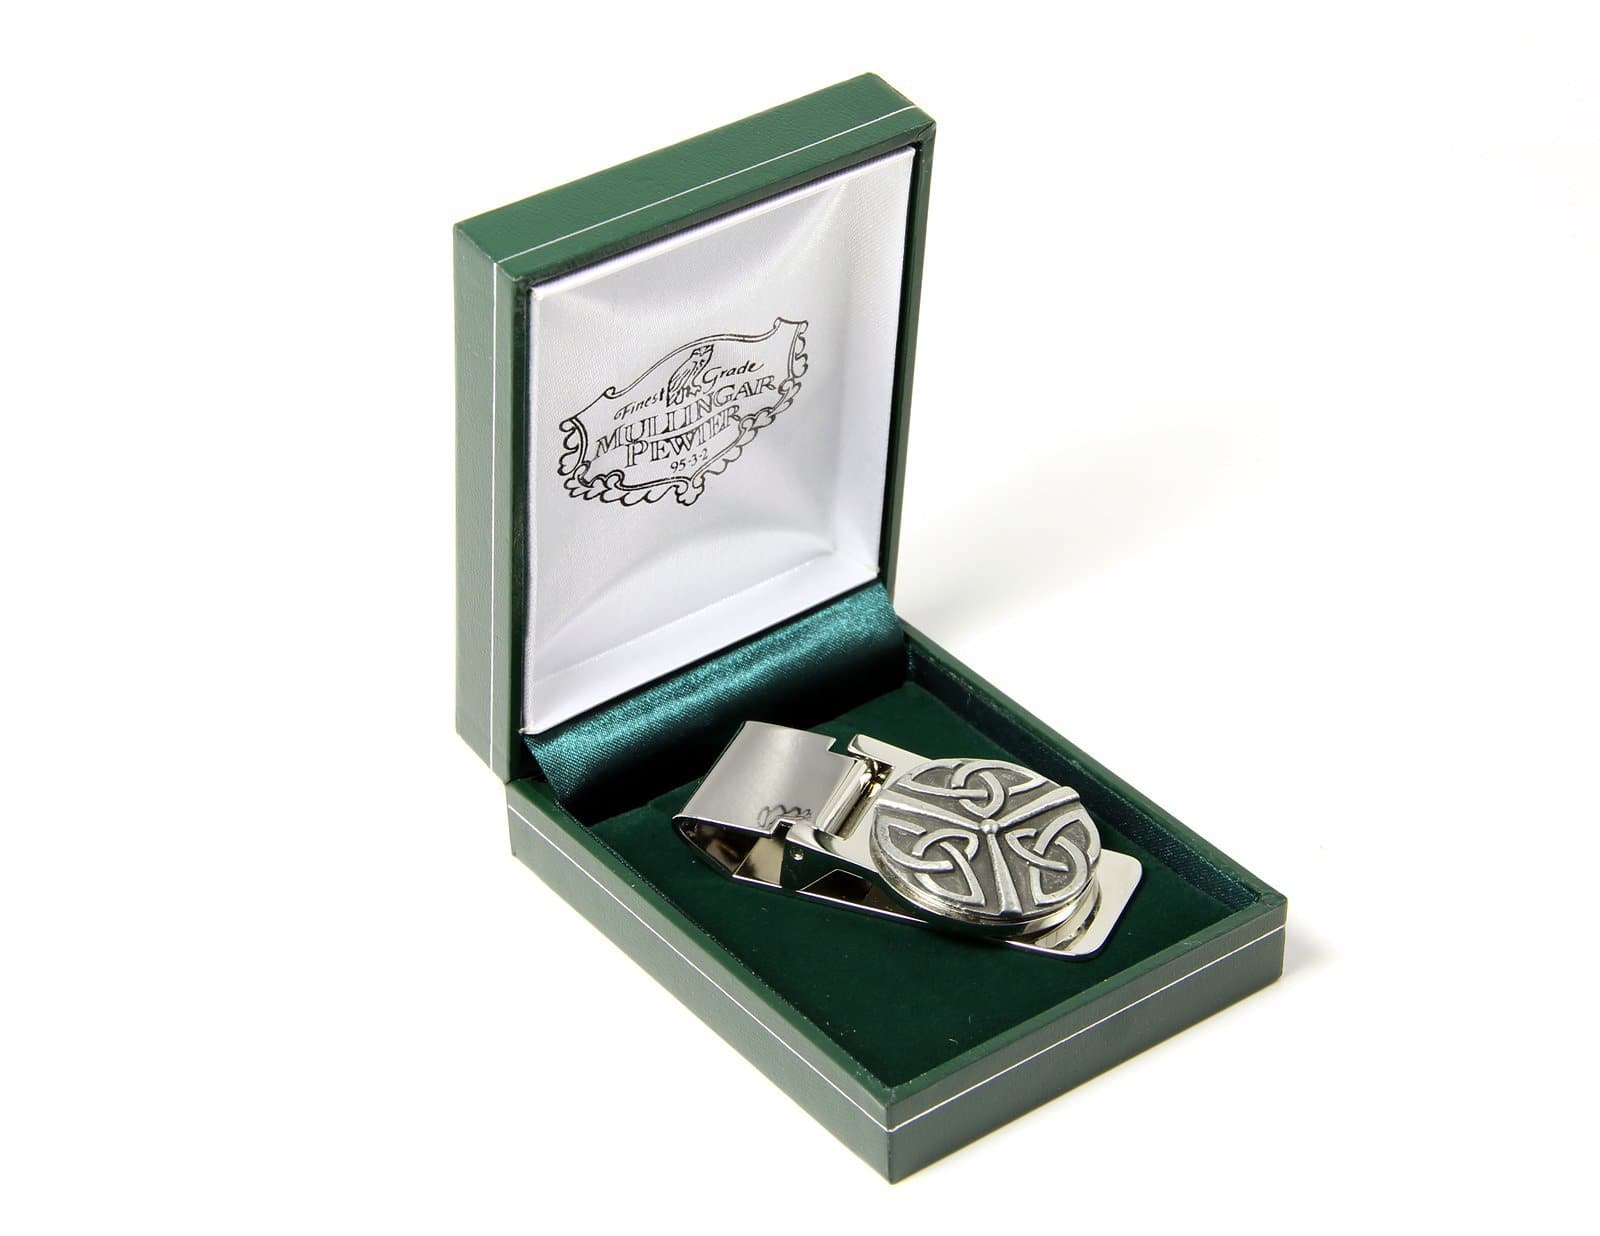 Mullingar Pewter Leather Credit Card Holder and Money Clip (Harp